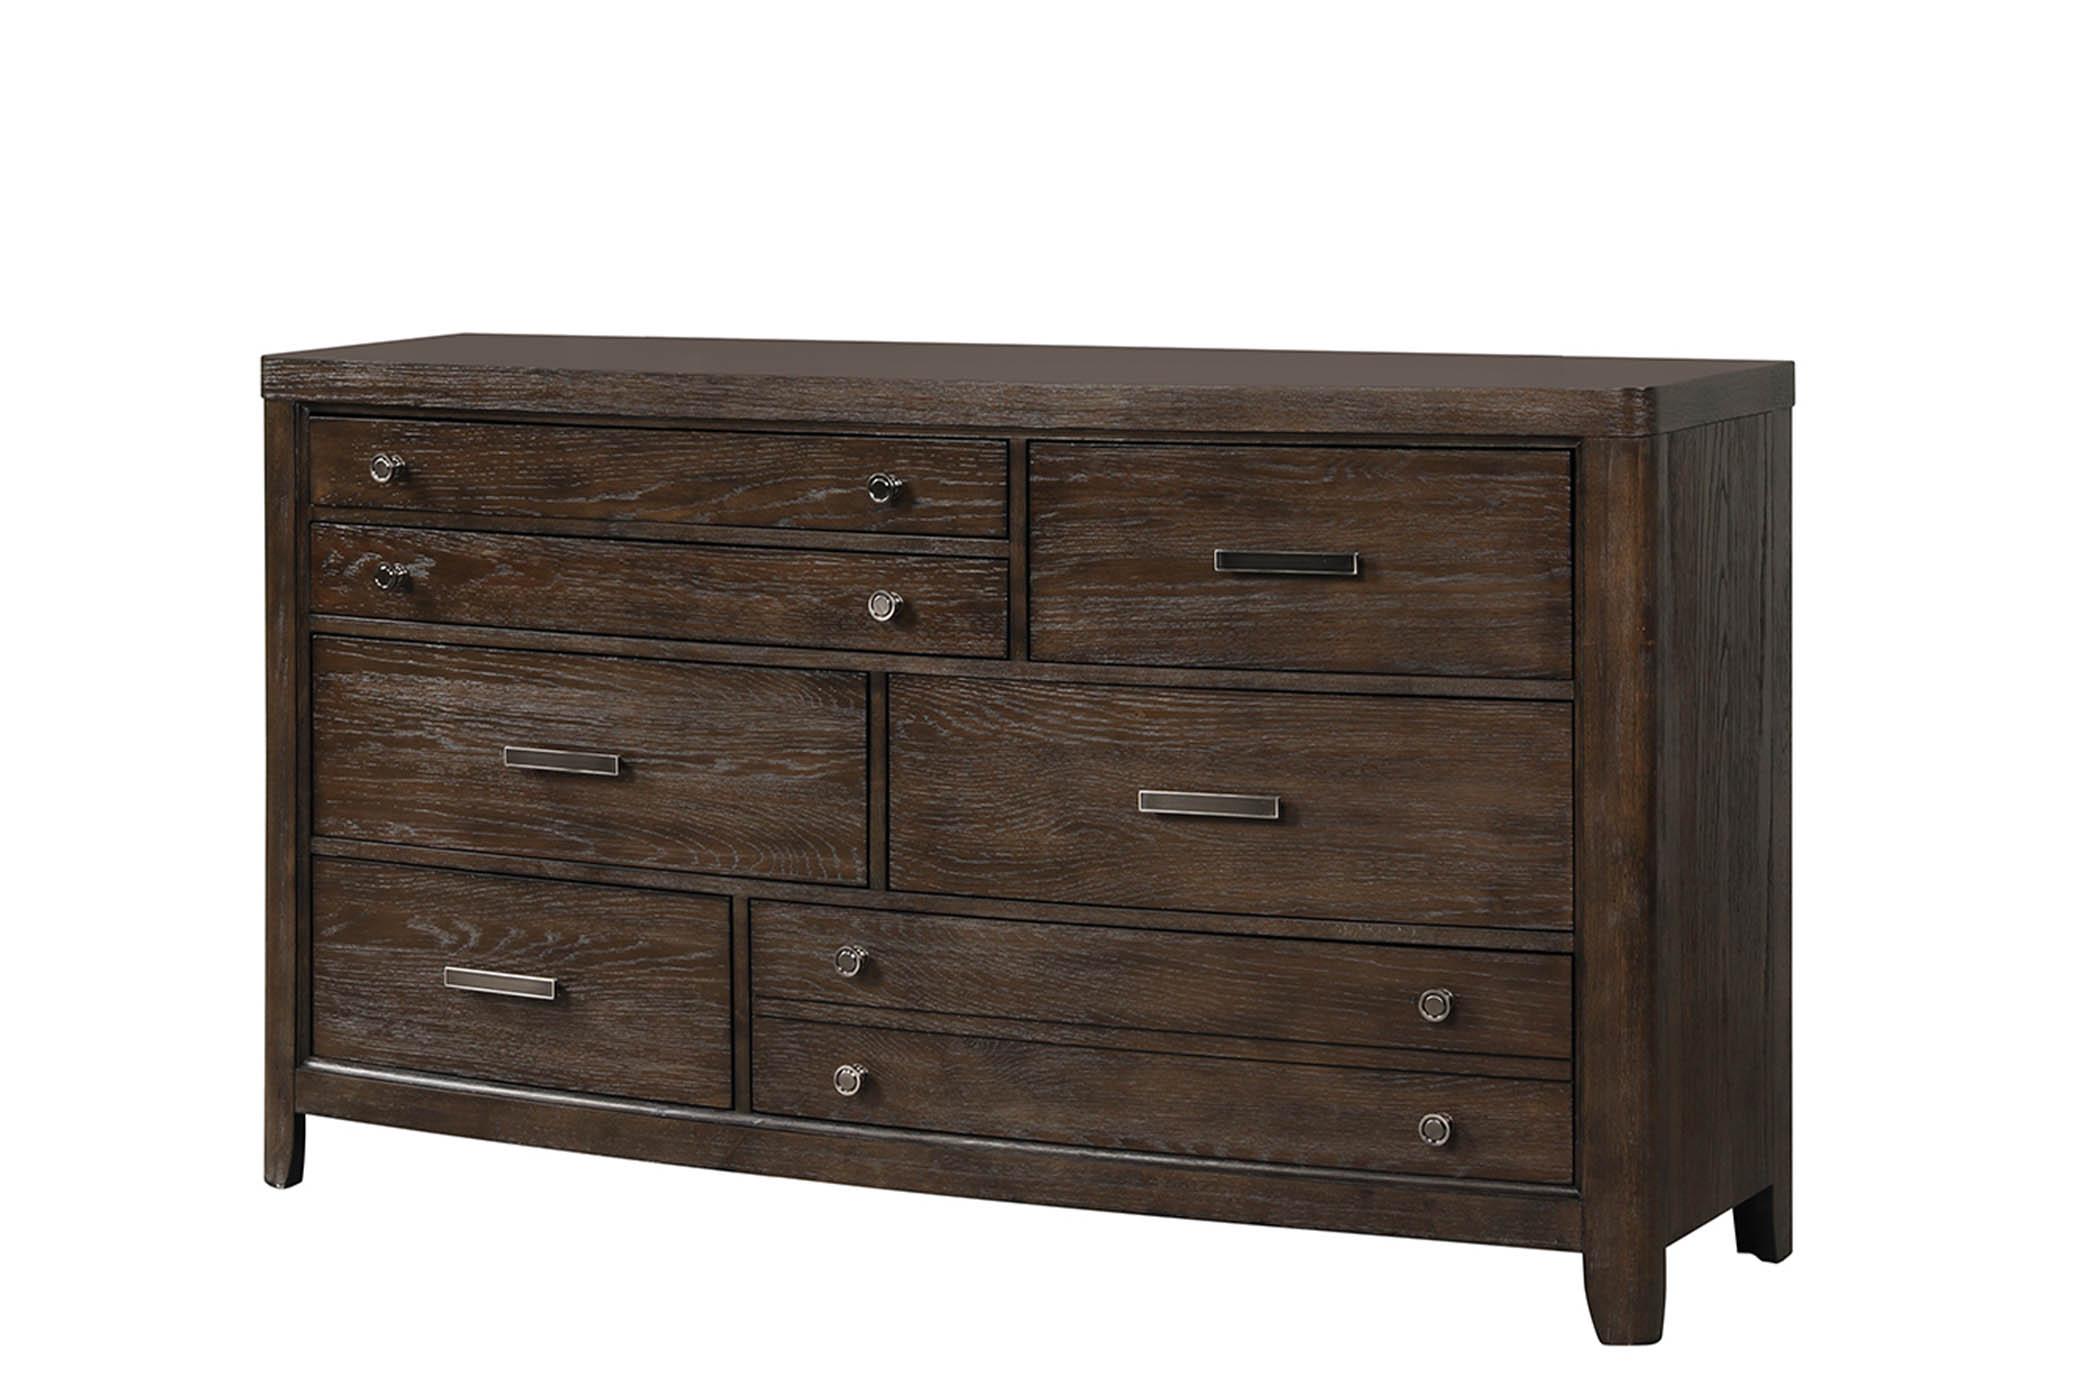 Classic, Transitional Dresser FULTON 1720-130 1720-130 in Brown 